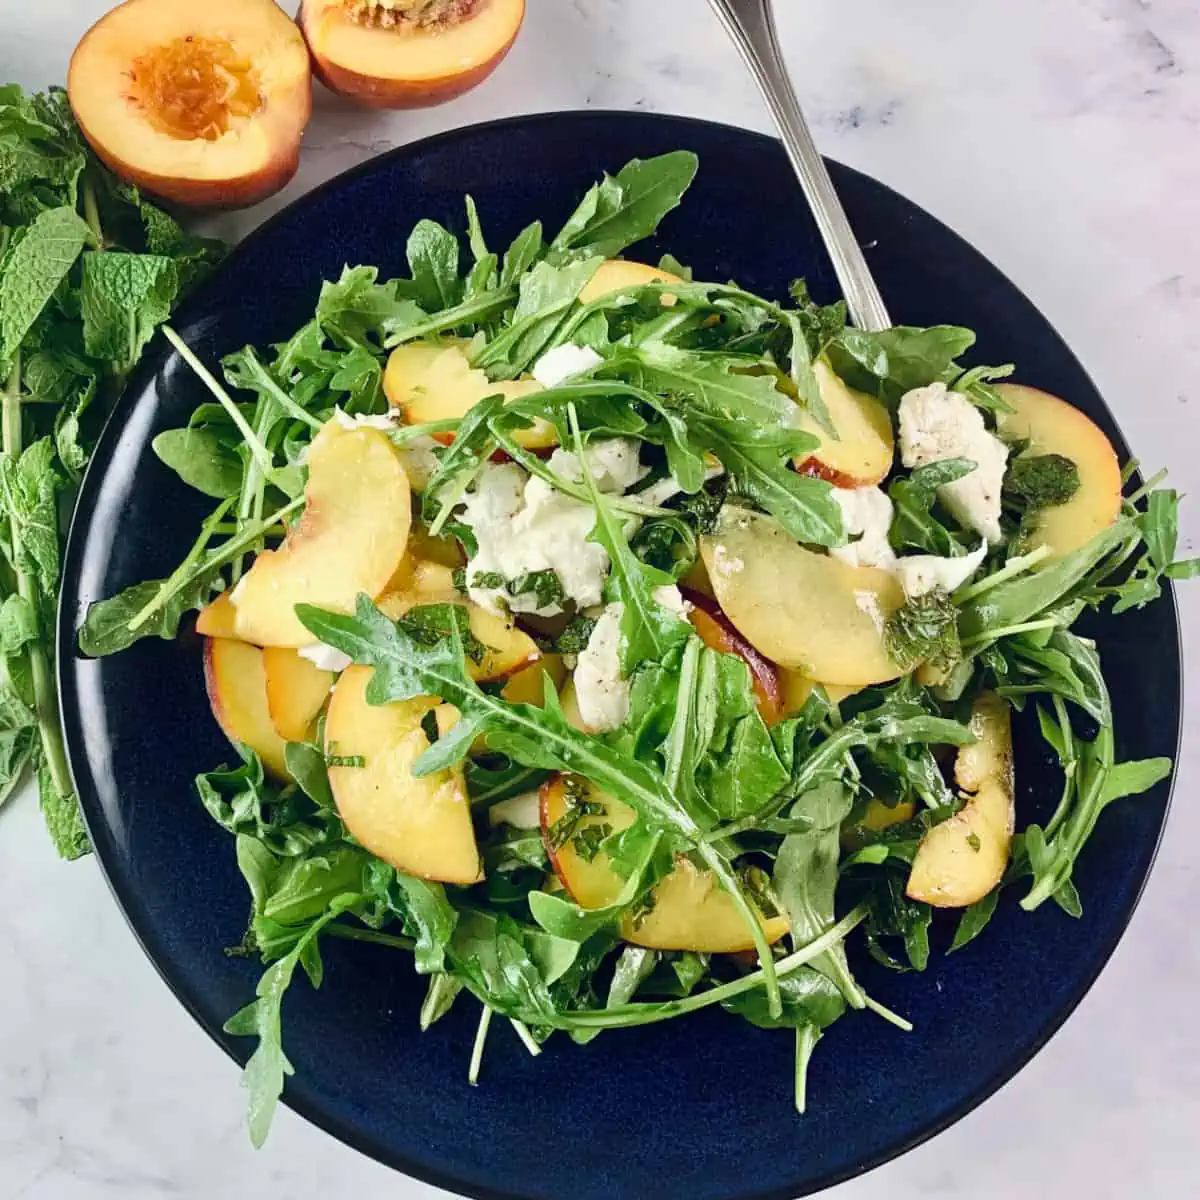 Peach salad on a navy plate with mint sprigs and halved peaches on the side.